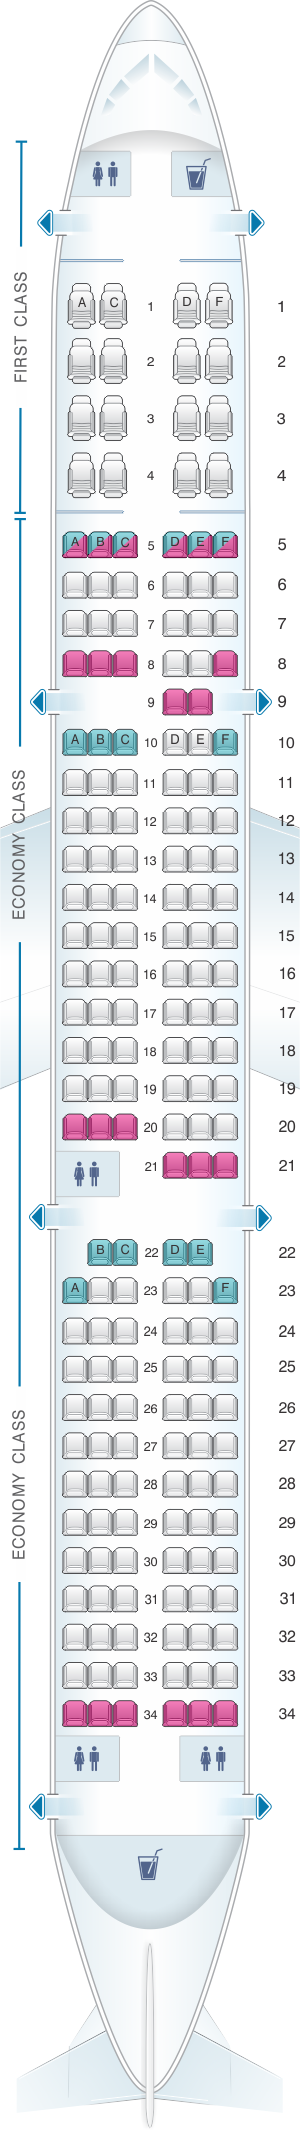 Seat Map American Airlines Airbus A321 187pax Seatmaestro